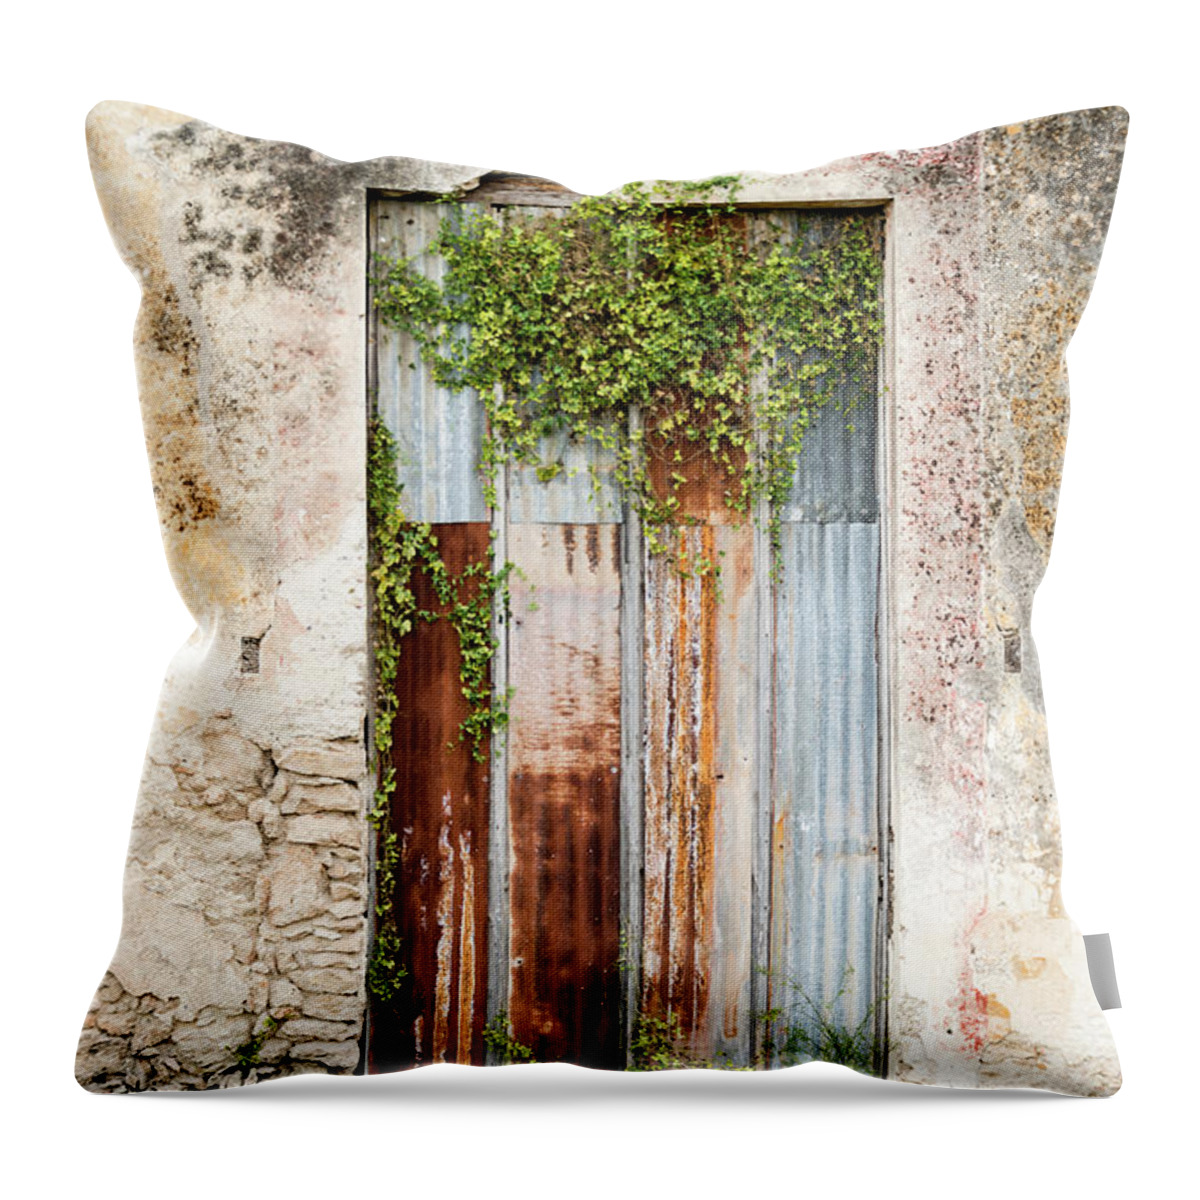 Steps Throw Pillow featuring the photograph Xxxl Old Weathered Door On Deterioting by Ogphoto